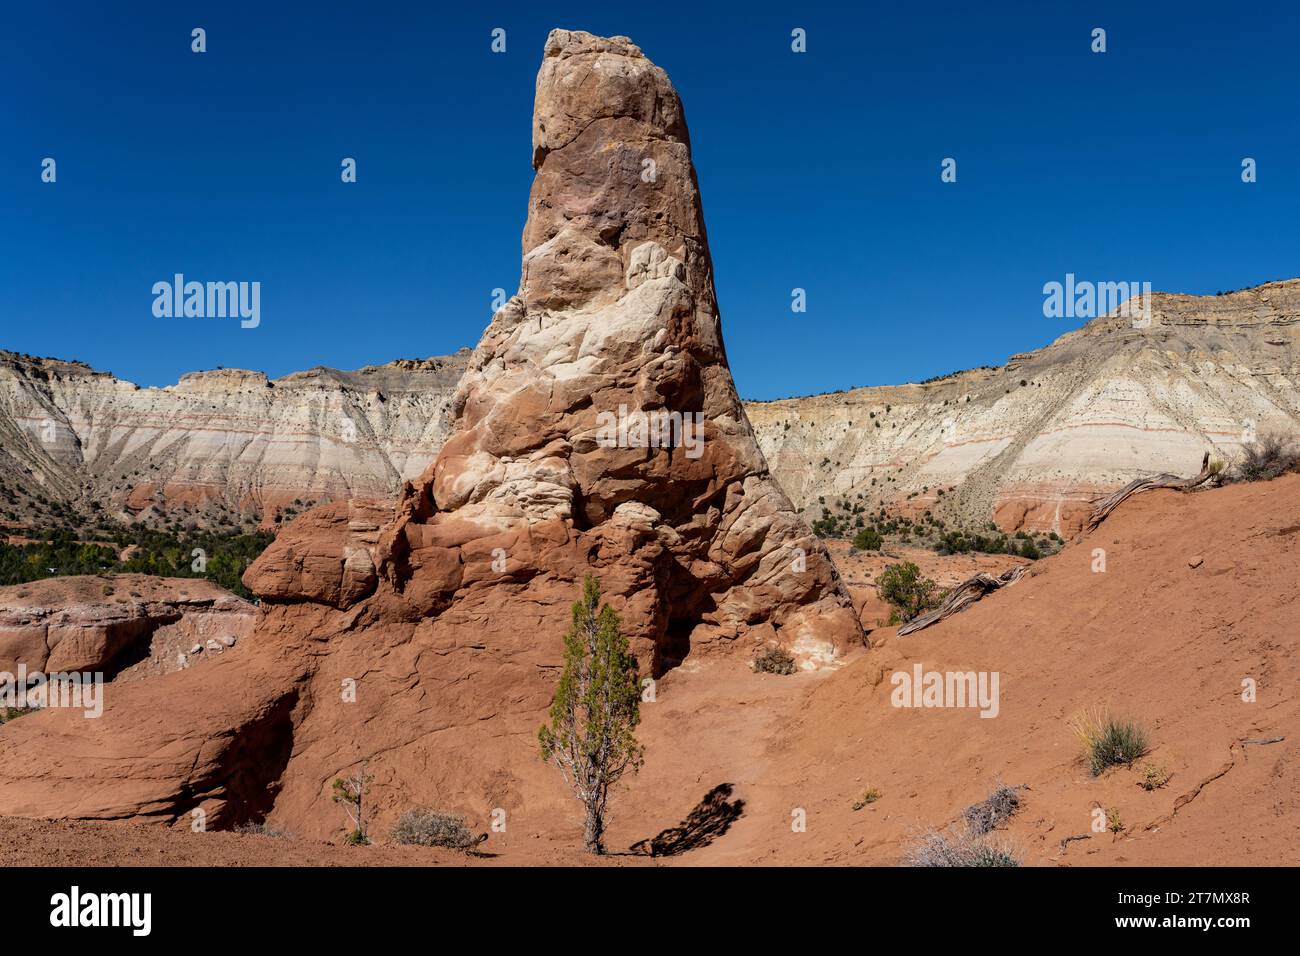 A small juniper tree in front of a sand pipe or chimney rock, an eroded rock tower in Kodachrome Basin State Park in Utah. Stock Photo